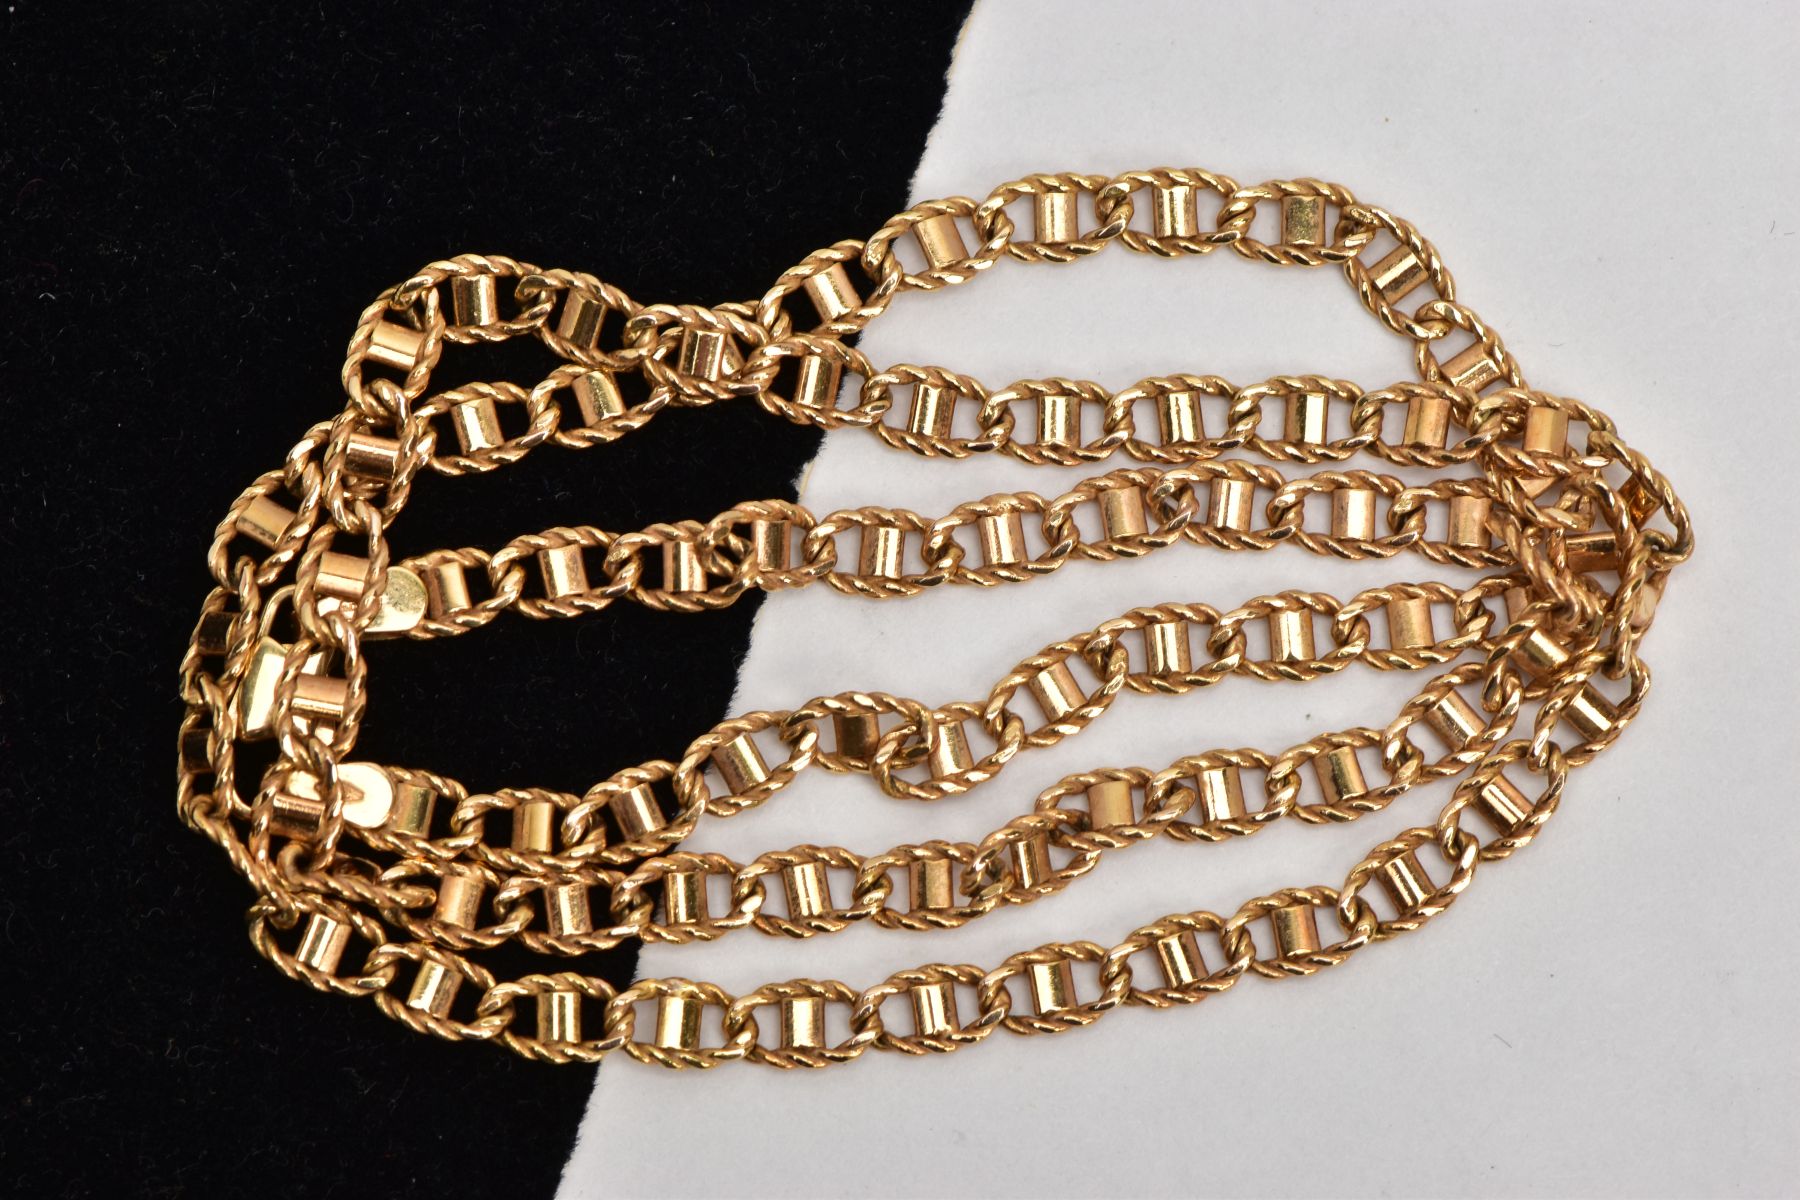 A 9CT GOLD ROPE TWIST MARINER CHAIN, fitted with a lobster claw clasp hallmarked 9ct gold London